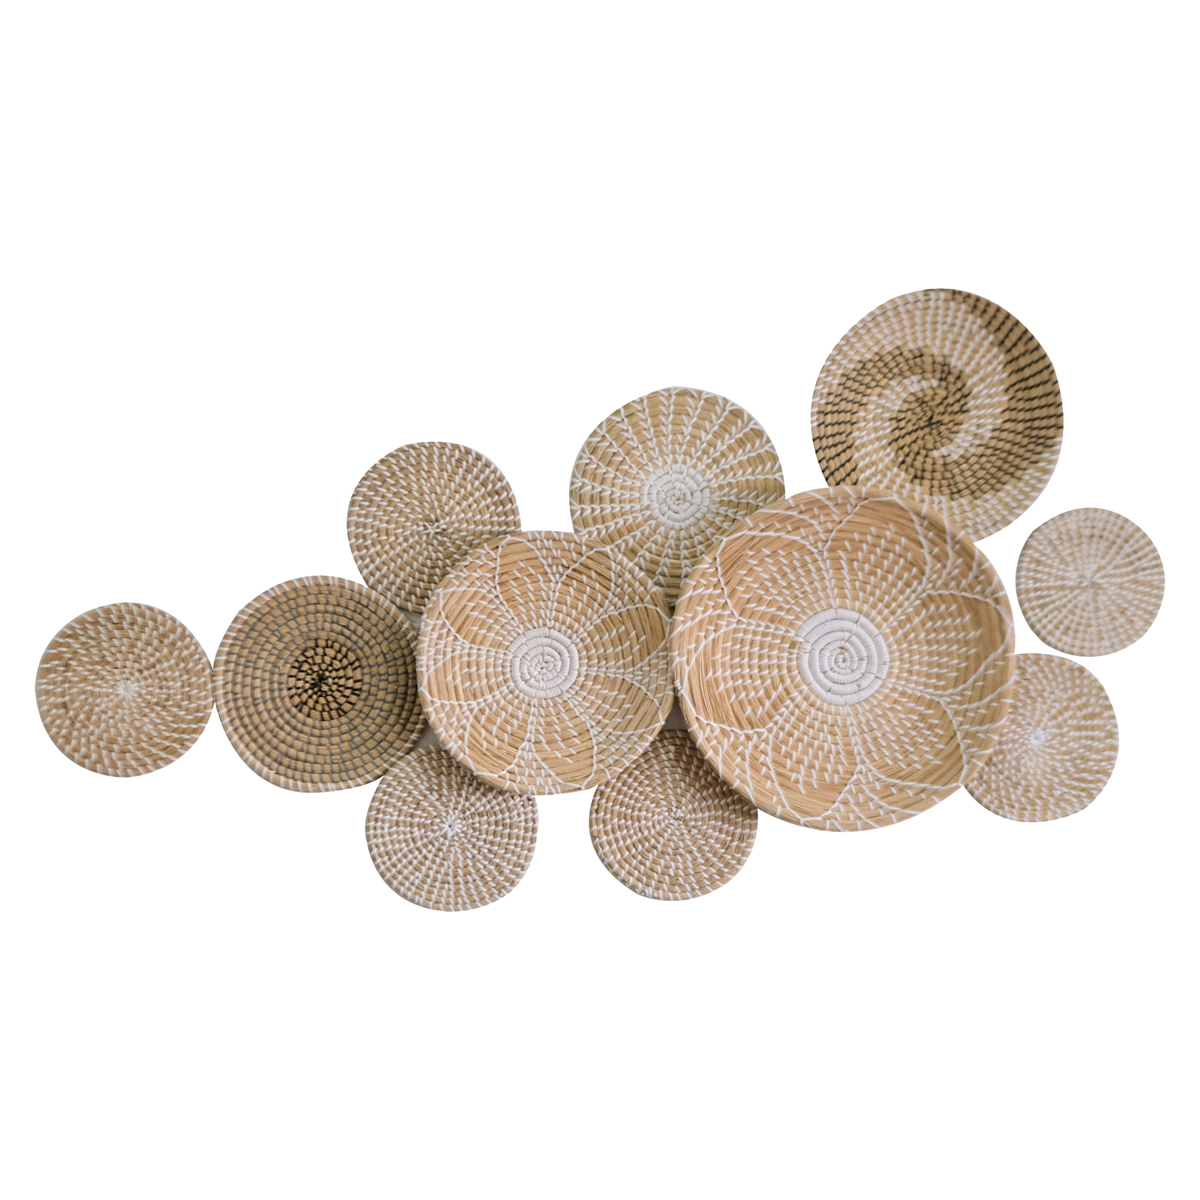 Seagrass Decorative Large Wall Basket Wall Art Set of 11